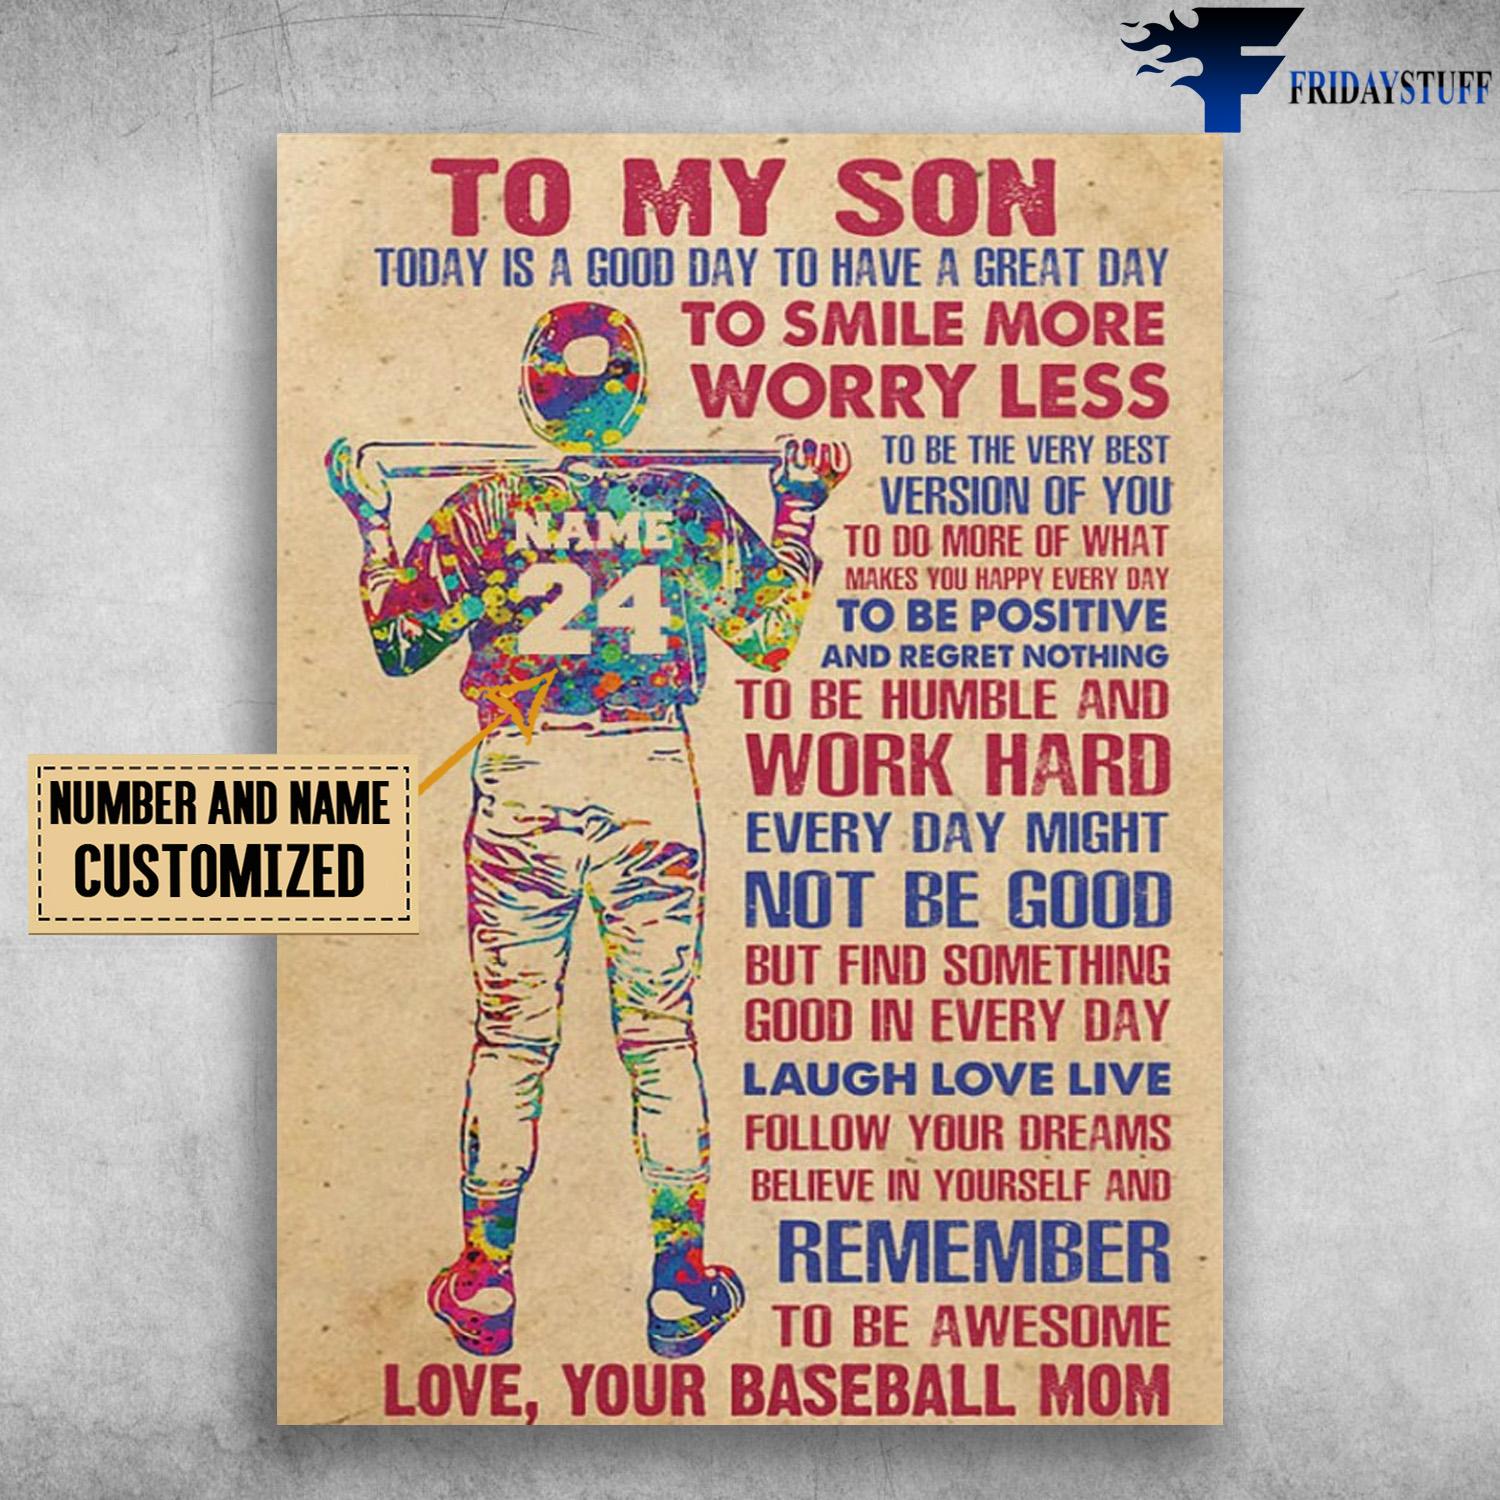 Baseball Poster, Baseball Player, To My Son, Today Is A Good Day, To Have A Great Day, To Smile More Worry Less, To Be The Very Best Version Of You, To Do More Of What Makes You Happy Everyday, Baseball Mom